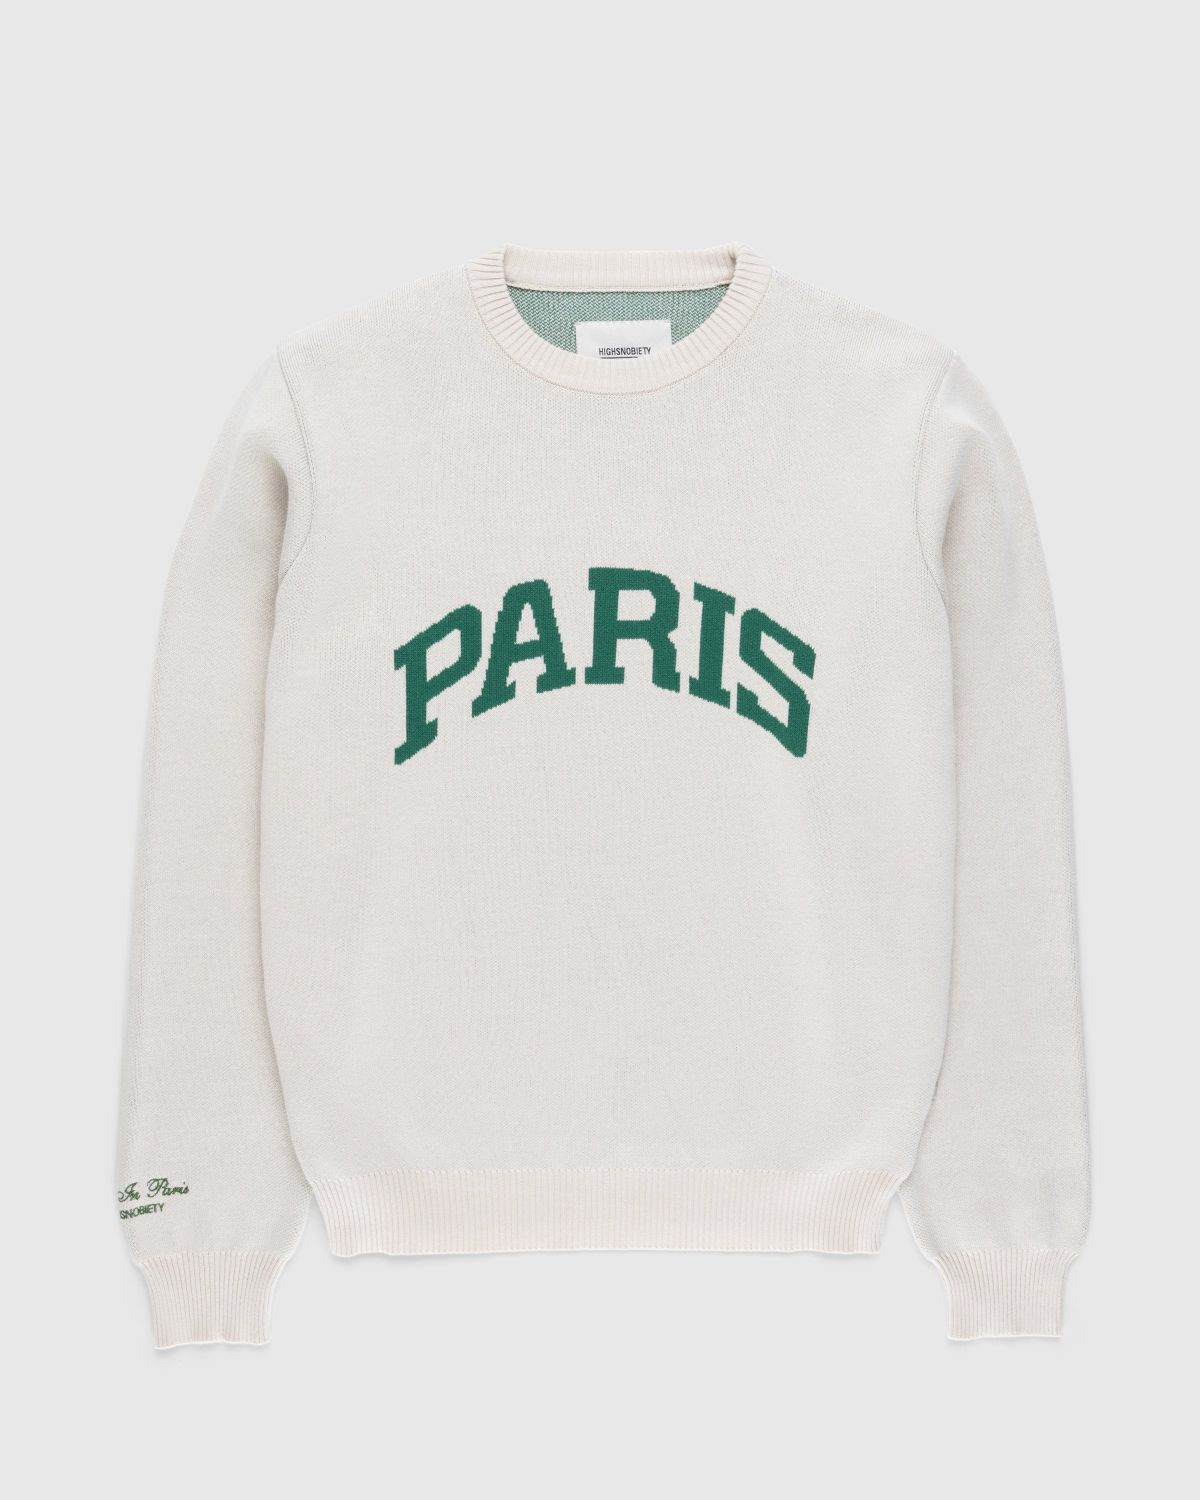 Highsnobiety – Not in Paris 5 Knitted Sweater - Sweats - Beige - Image 1